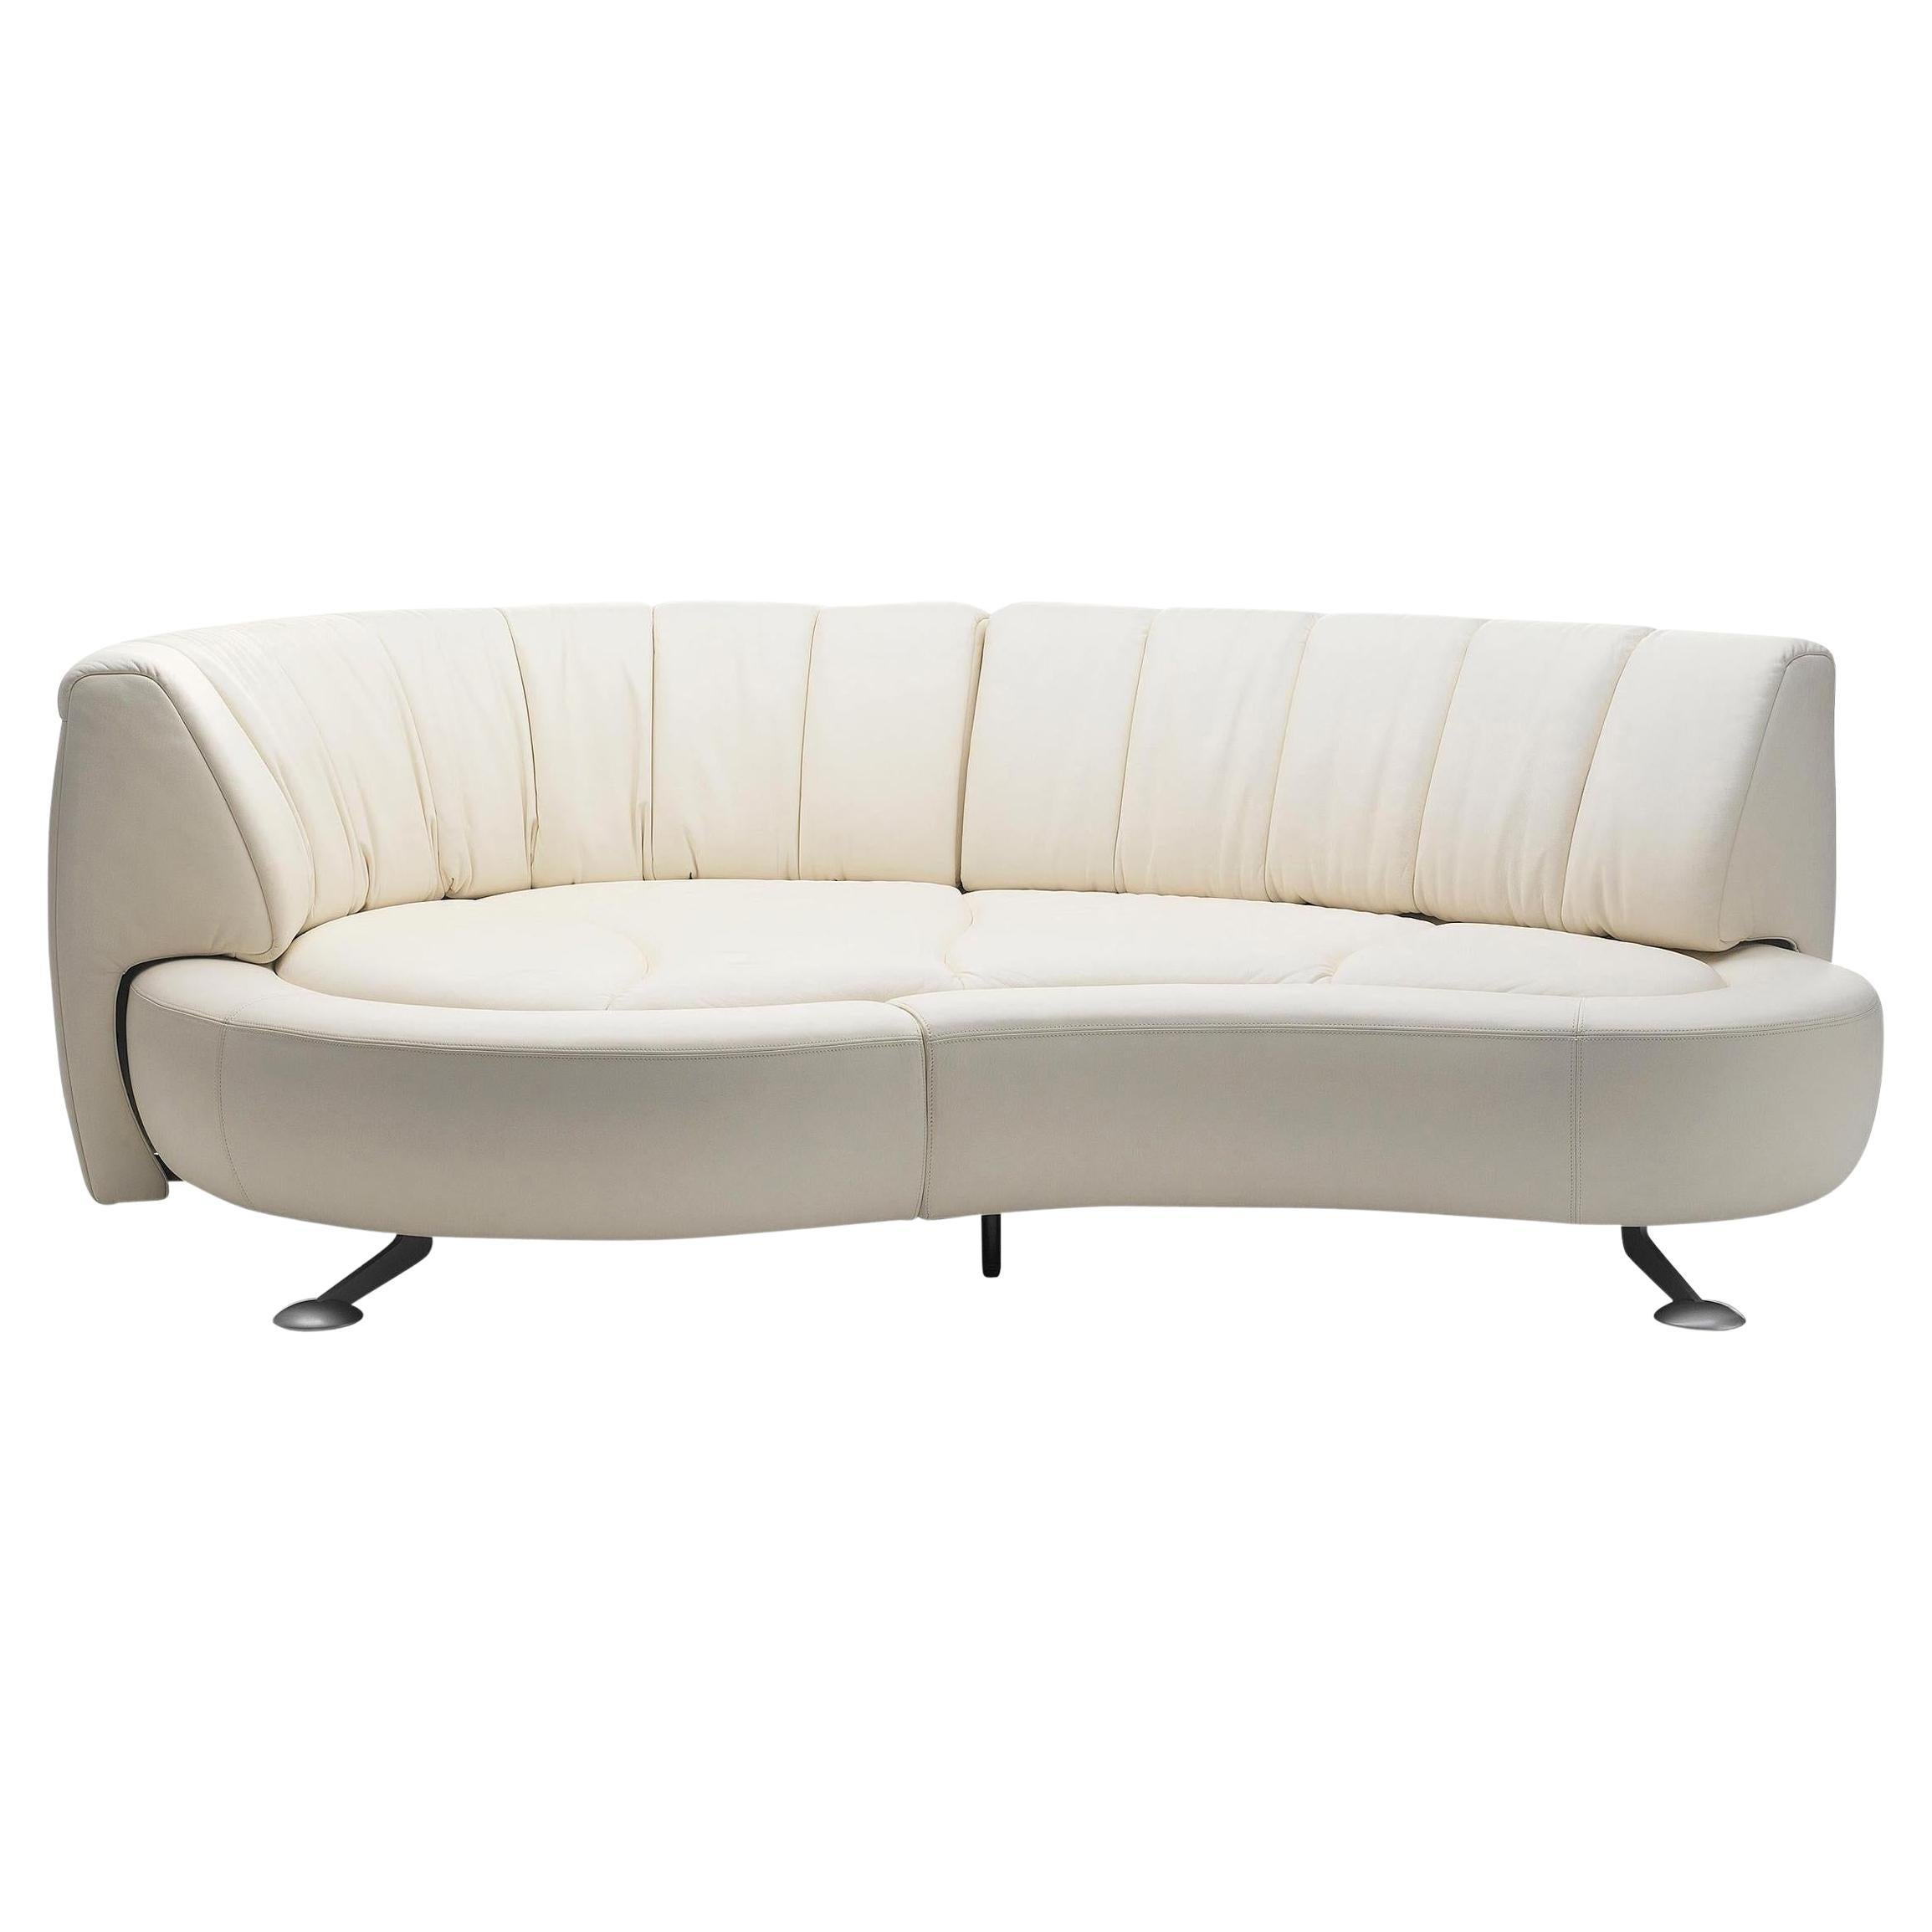 De Sede DS-164 Right Sofa Bed in Off White Upholstery by Hugo de Ruiter For Sale